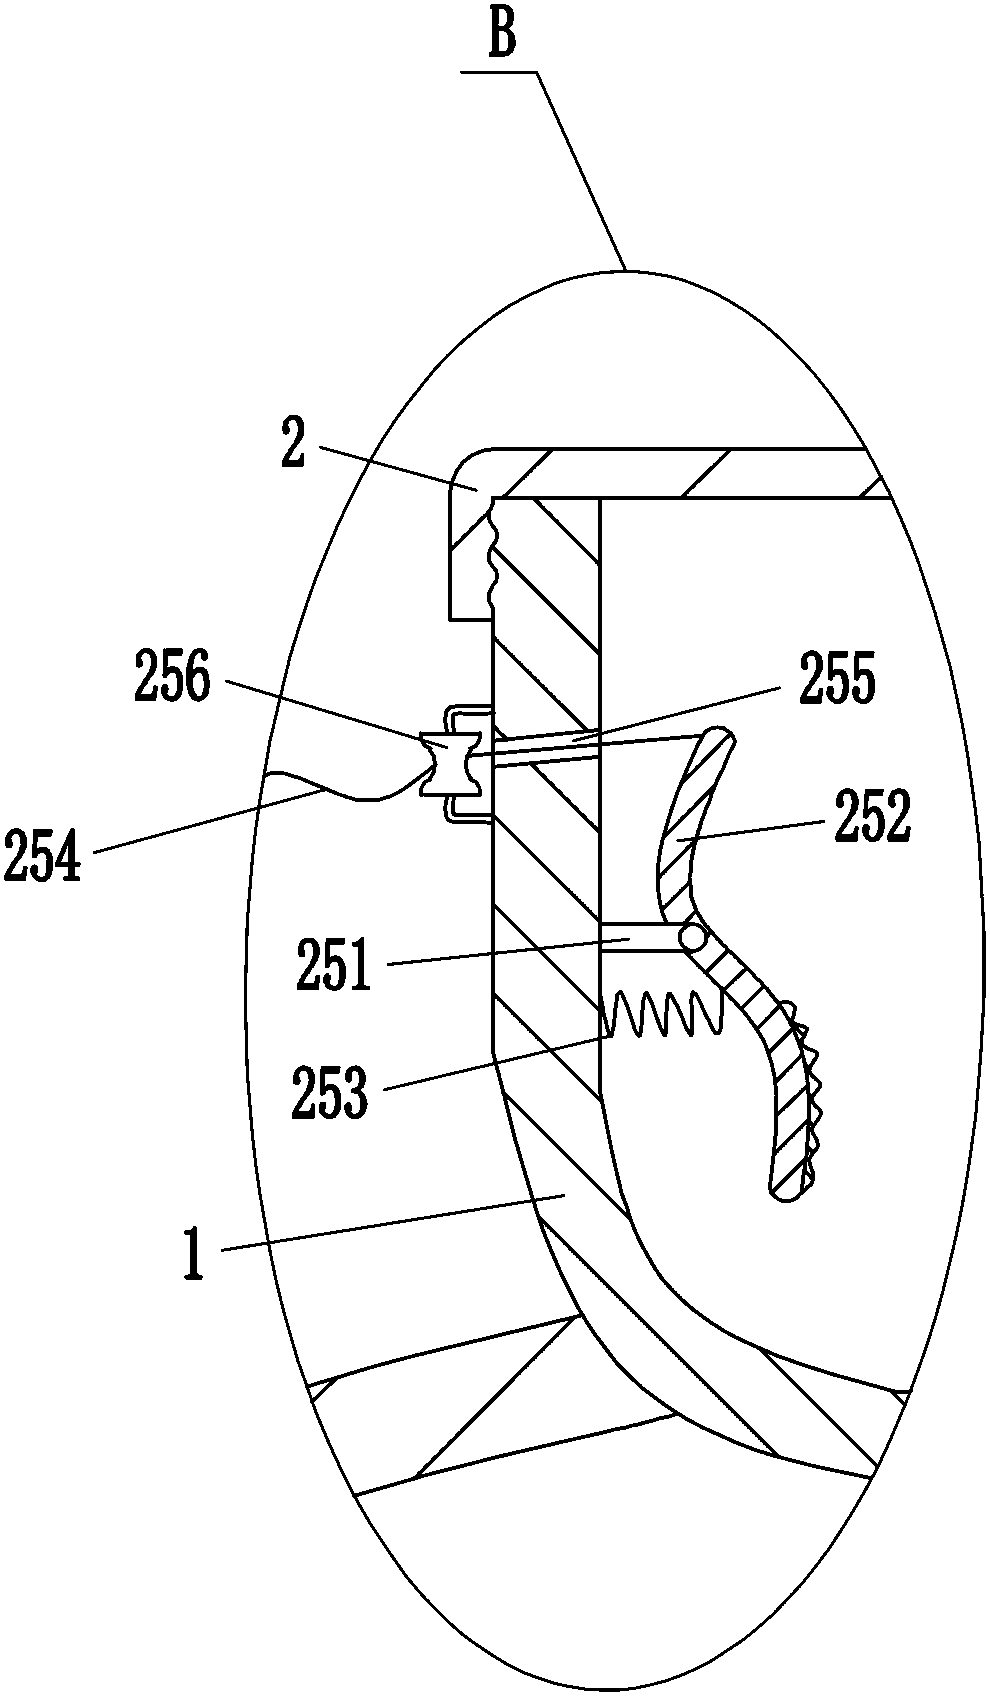 Worn medical adhesive tape pull-parting device